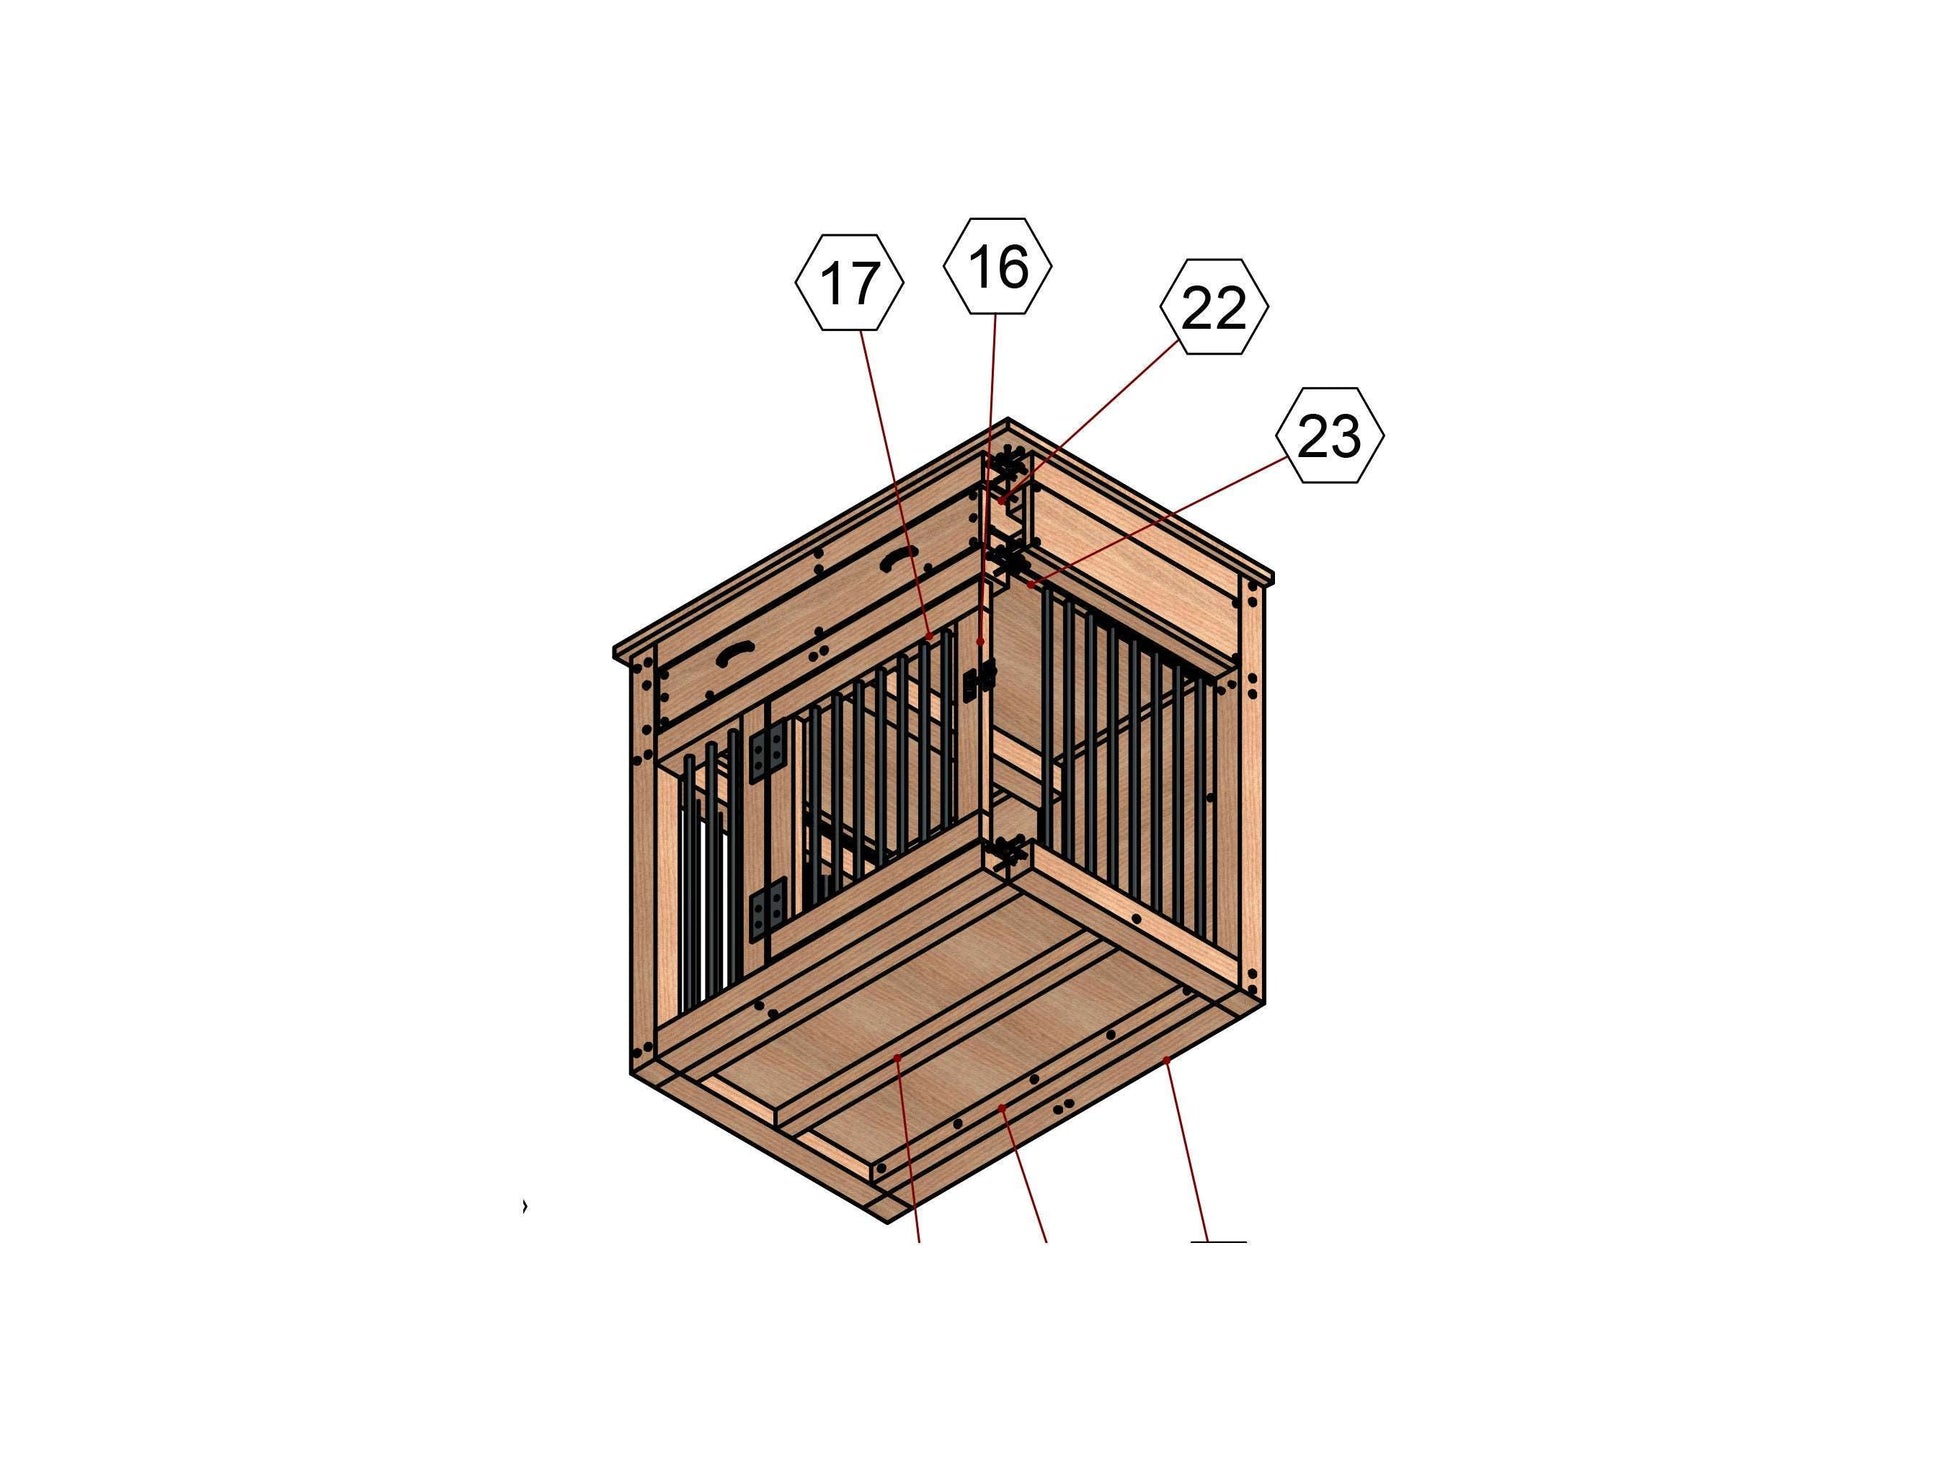 Single Medium Plan for Dog Kennel with drawers - Dog Crate Furniture - Build plans for dog cage-32x24x36